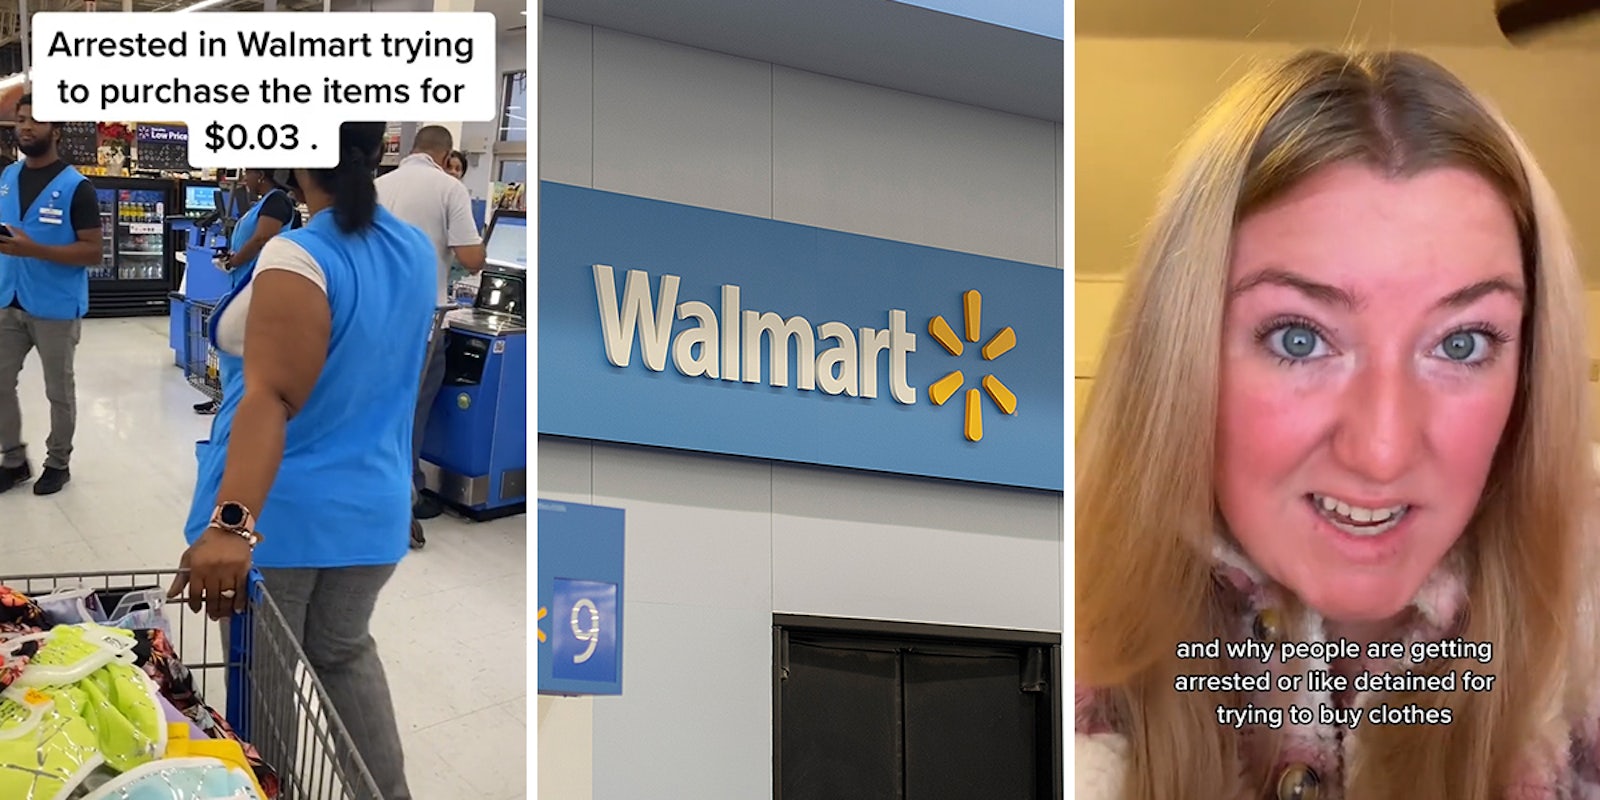 Walmart worker pulling cart full of clothes with caption 'Arrested in Walmart for trying to purchase the items for $0.03' (l) Walmart interior sign (c) woman speaking with caption 'and why people are getting arrested or like detained for trying to buy clothes' (r)